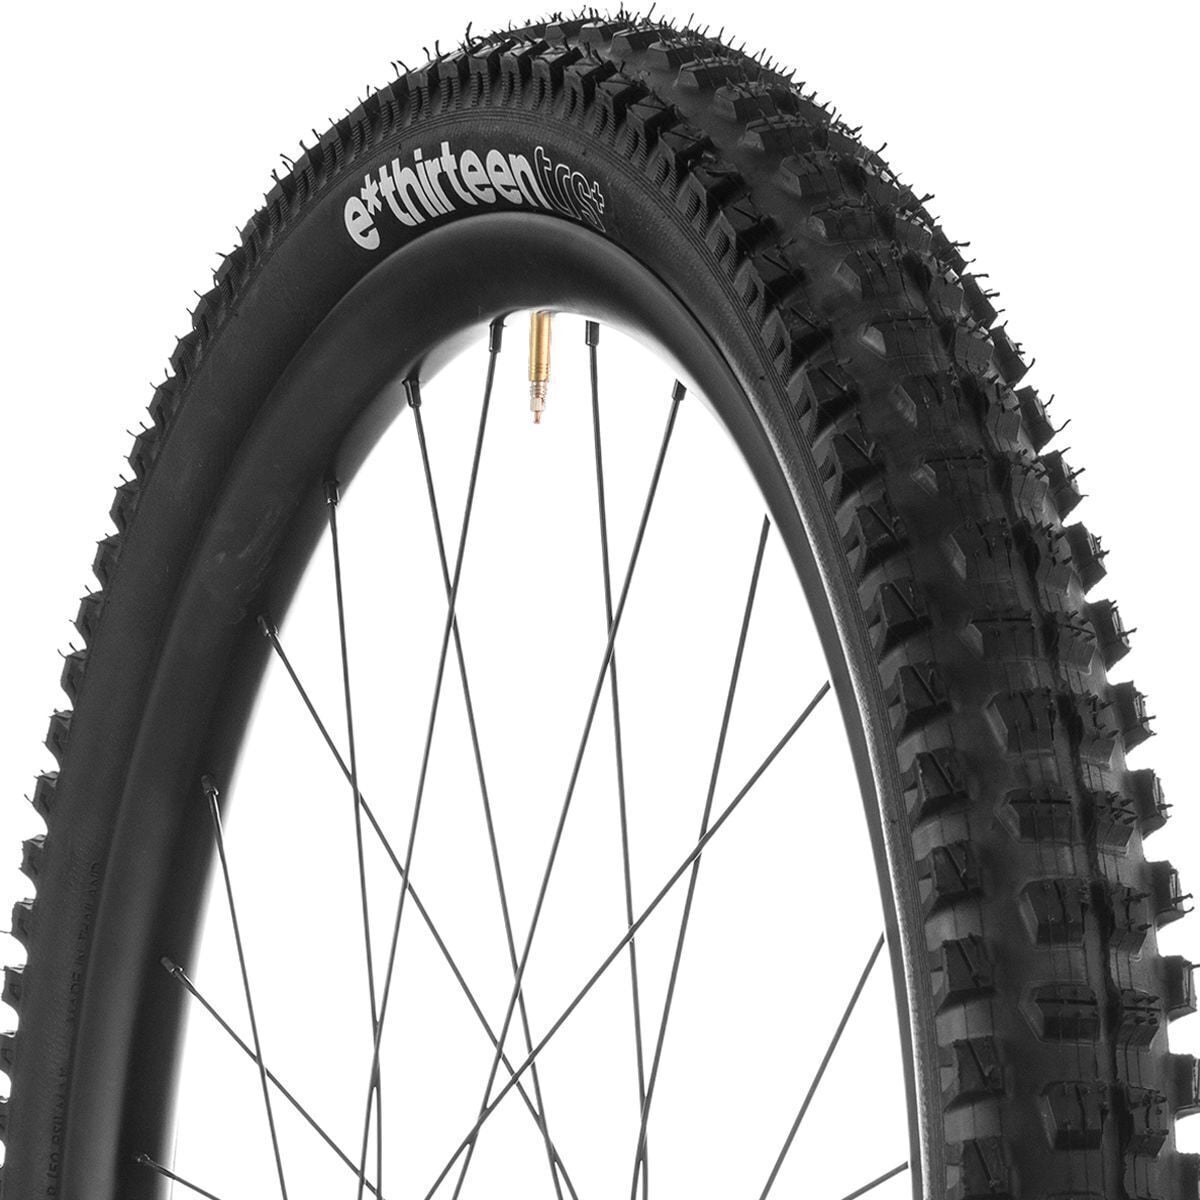 e*thirteen components TRS Plus Tire - 27.5in